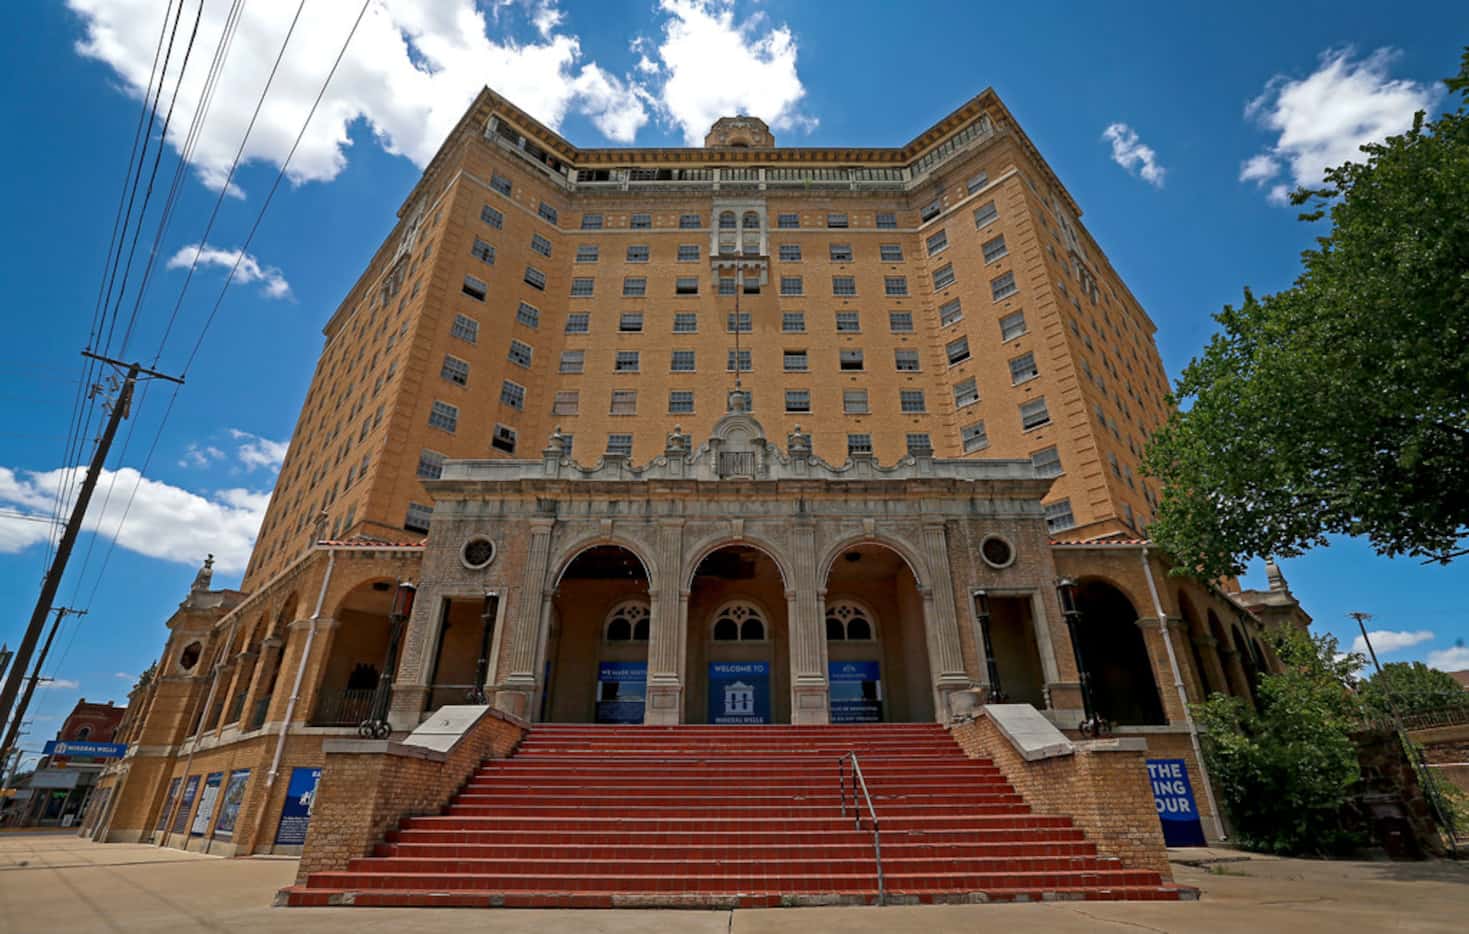 The historic Baker Hotel in Mineral Wells opened in 1929 and has been closed since the 1970s.  